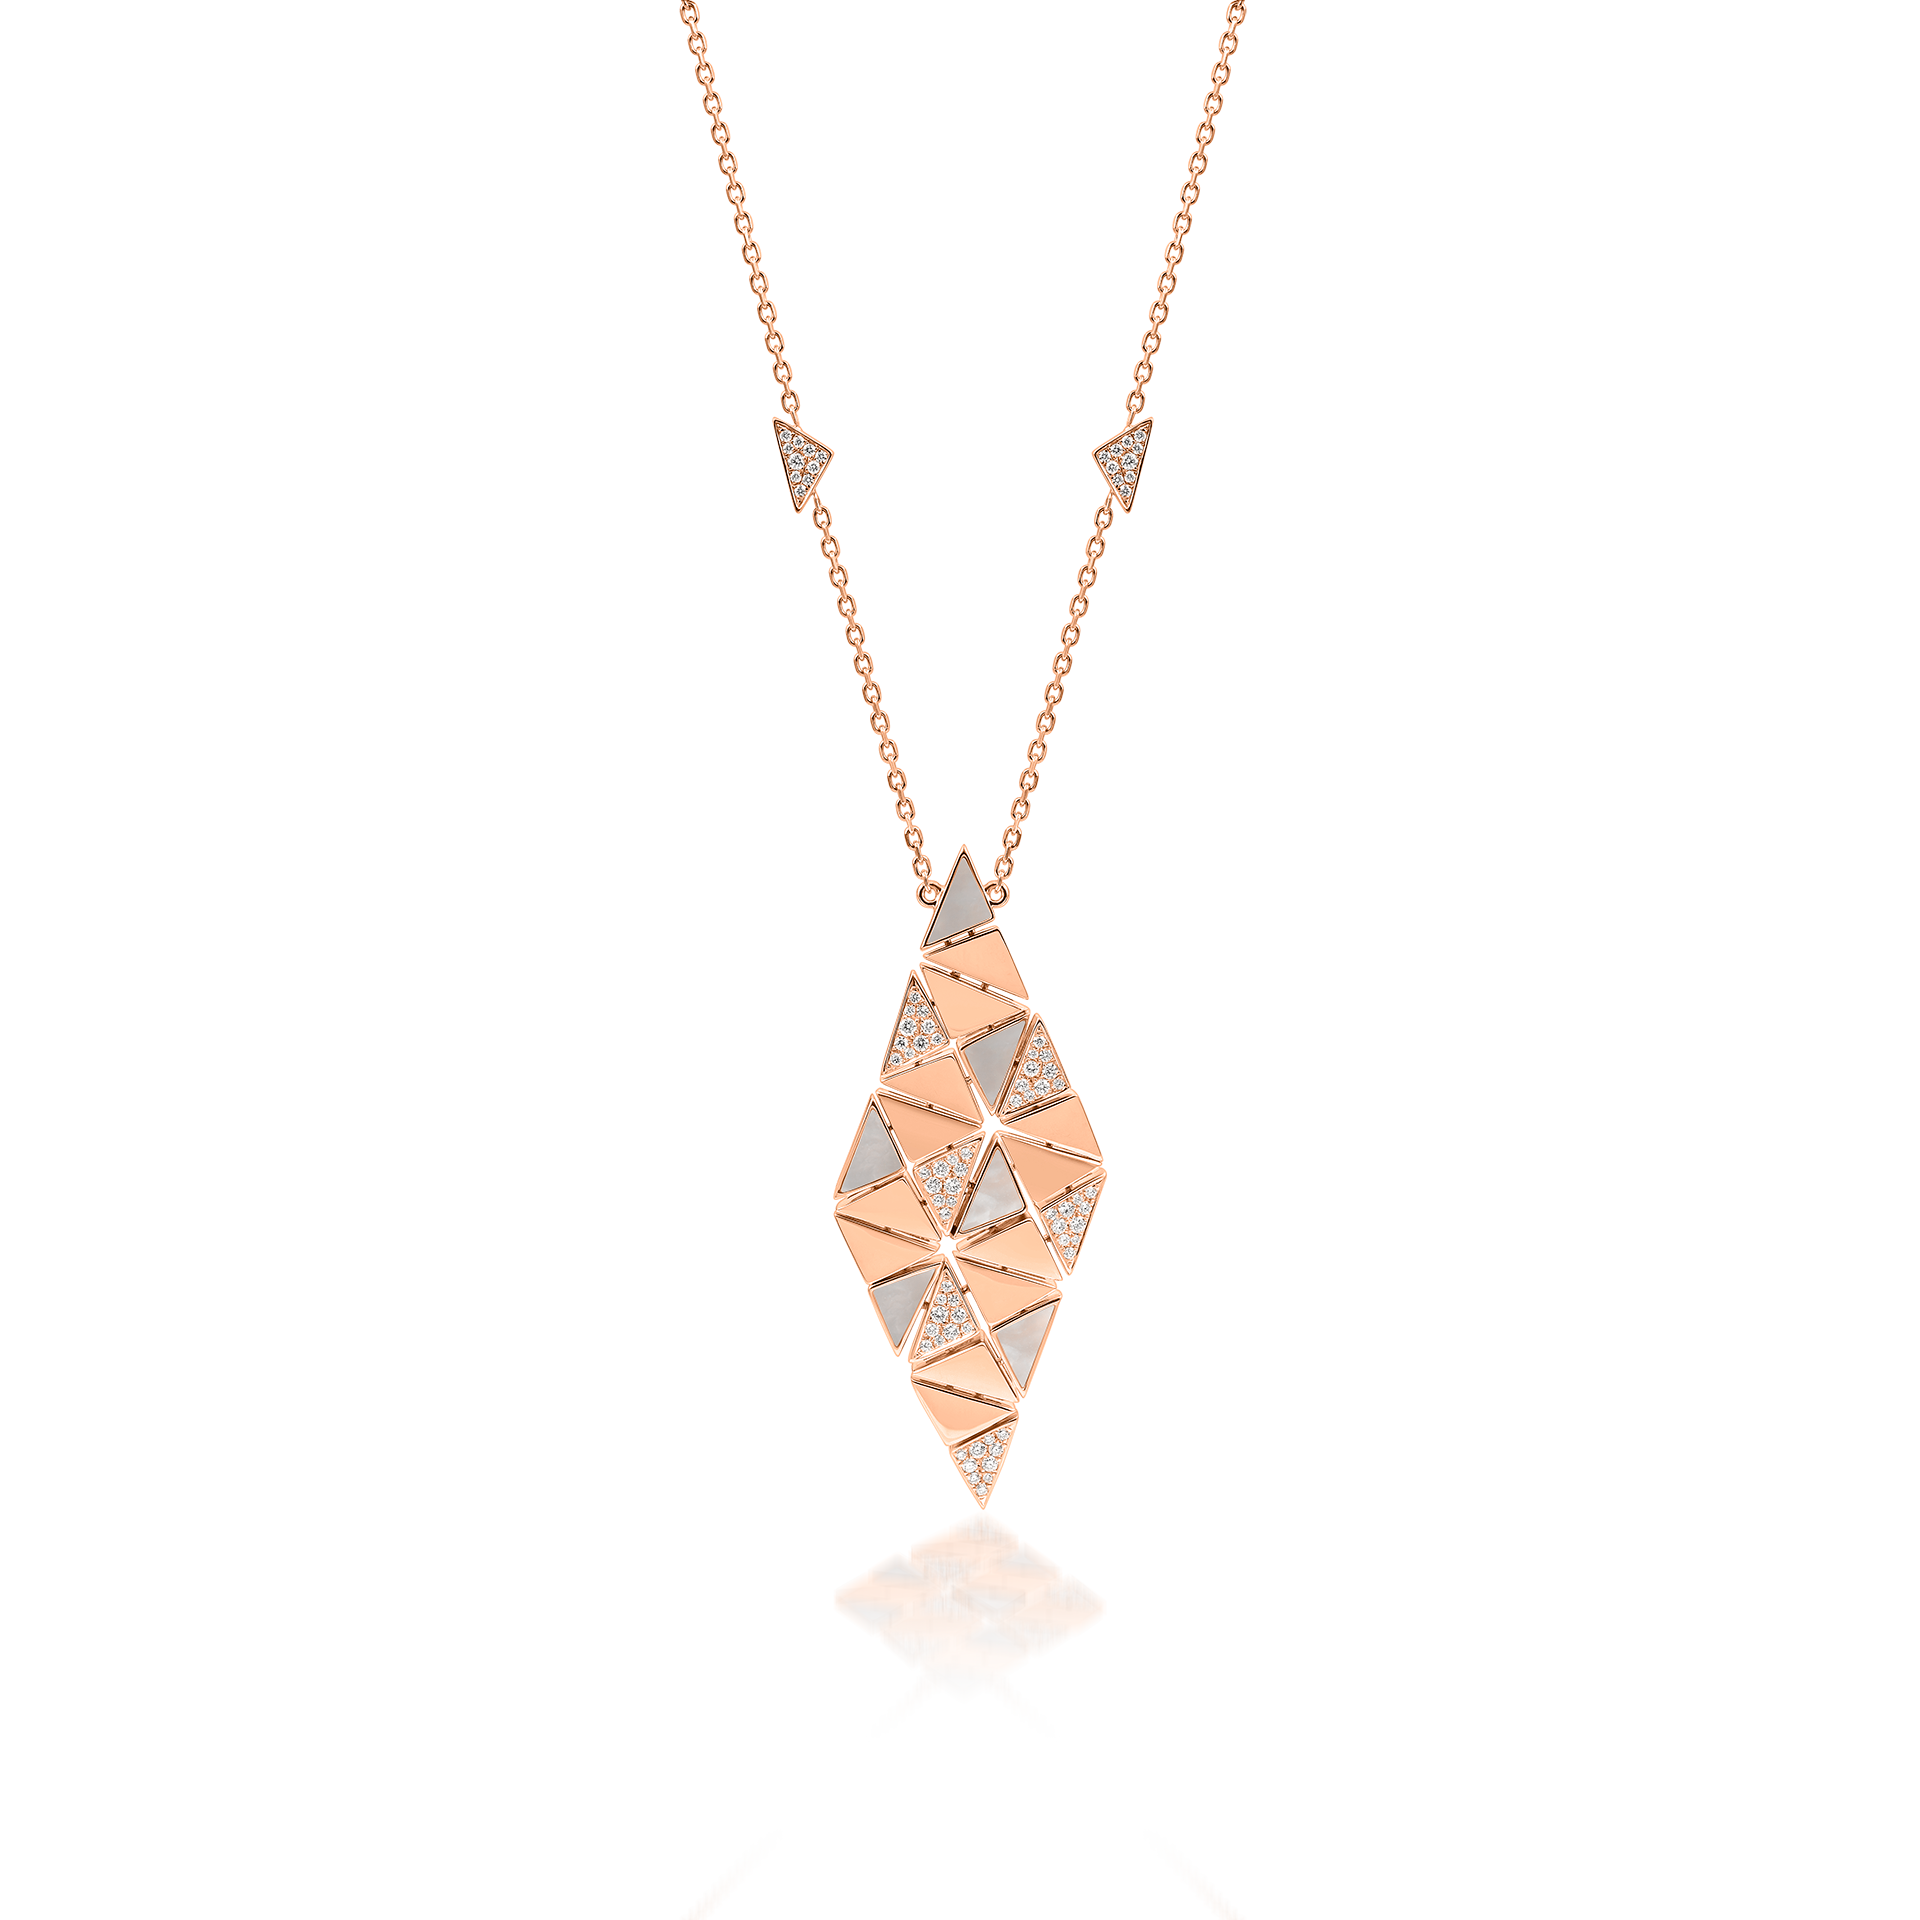 Deco Amrita Pendant with White Mother of Pearl and Diamonds  In 18K Rose Gold